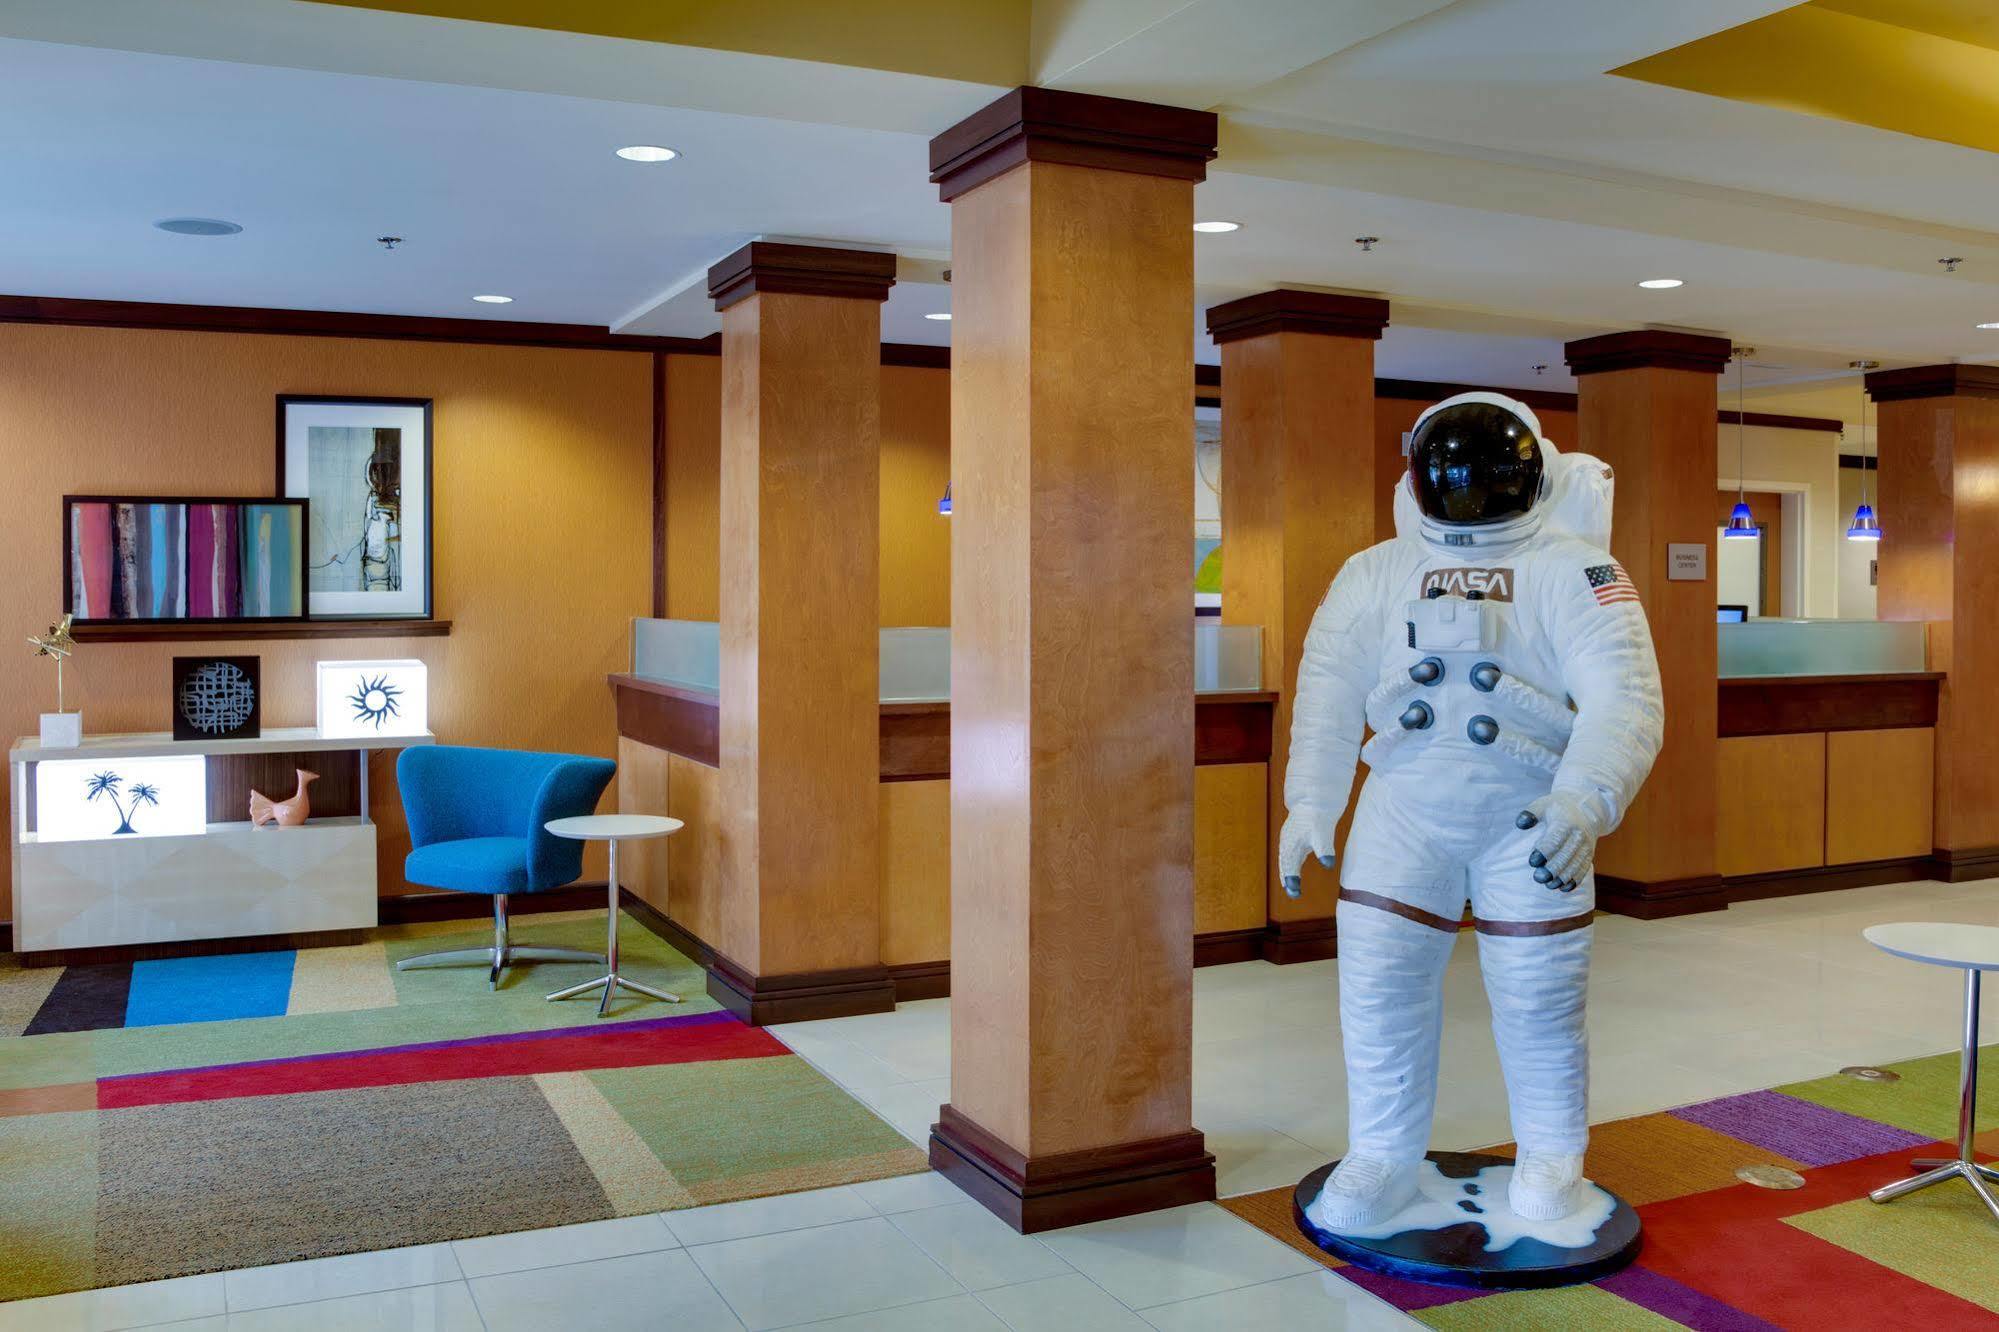 Fairfield Inn And Suites By Marriott Titusville Kennedy Space Center Buitenkant foto